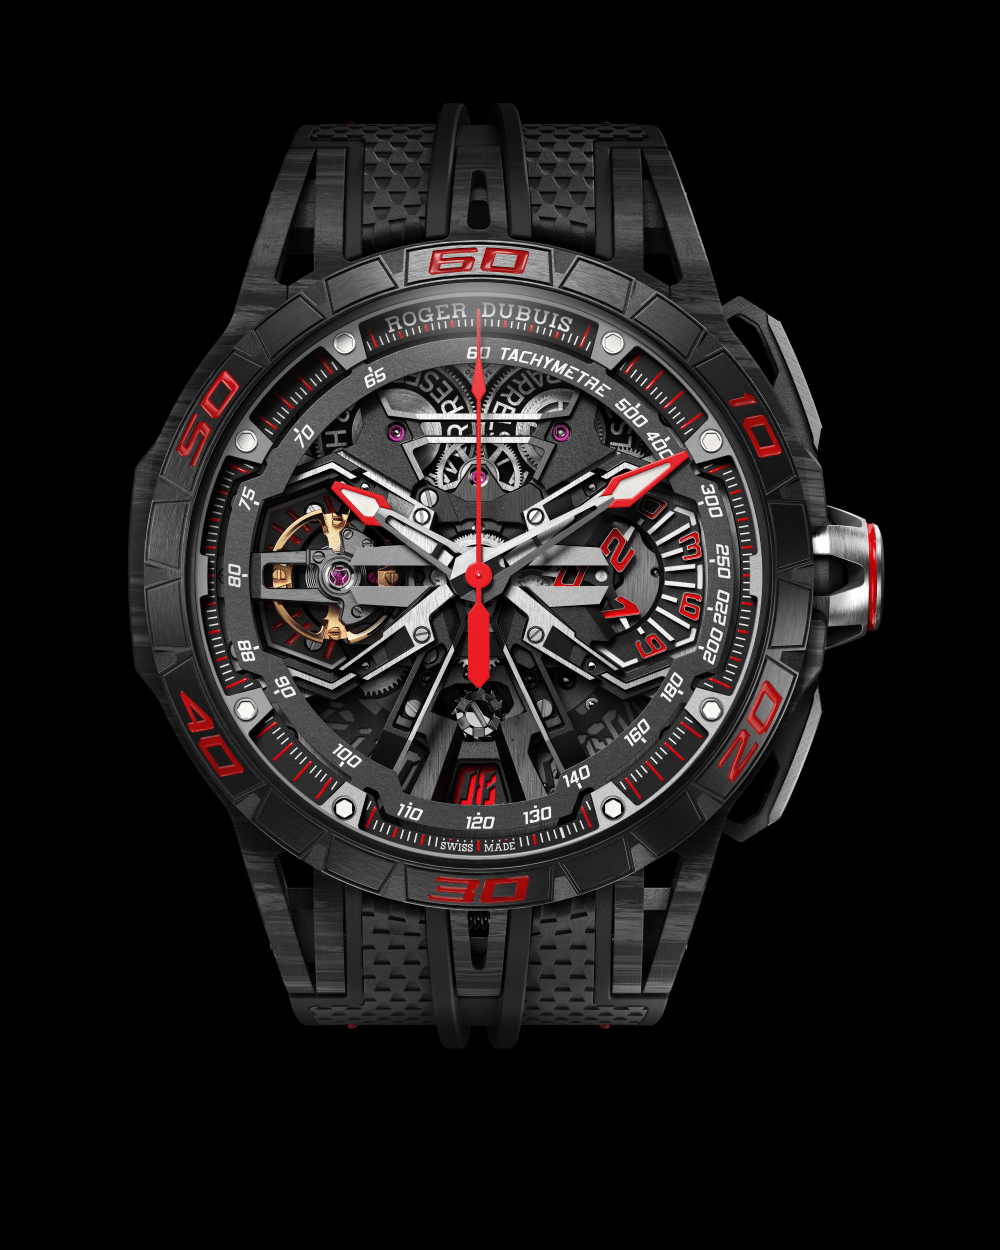 The Excalibur Spider Flyback Chronograph – Speed and Excellence